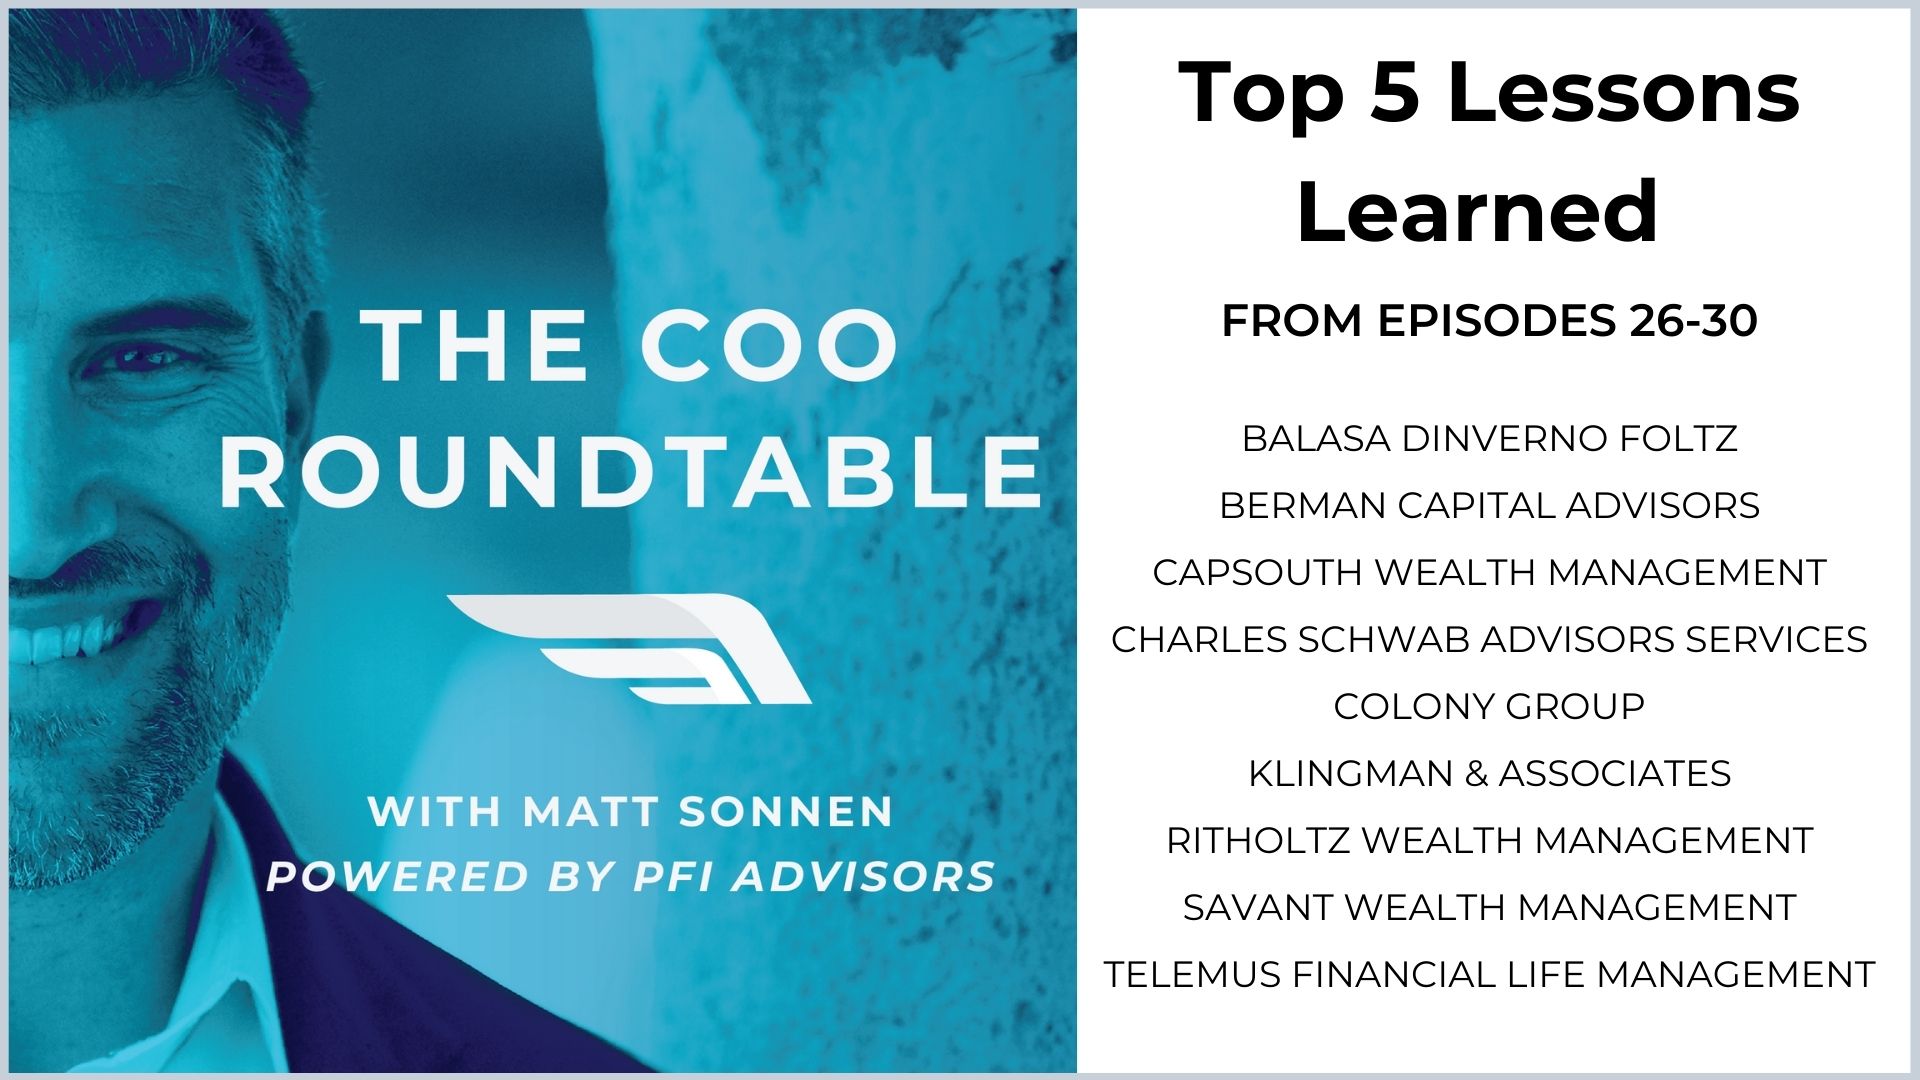 Top 5 Lessons Learned from Episodes  26-30 of The COO Roundtable